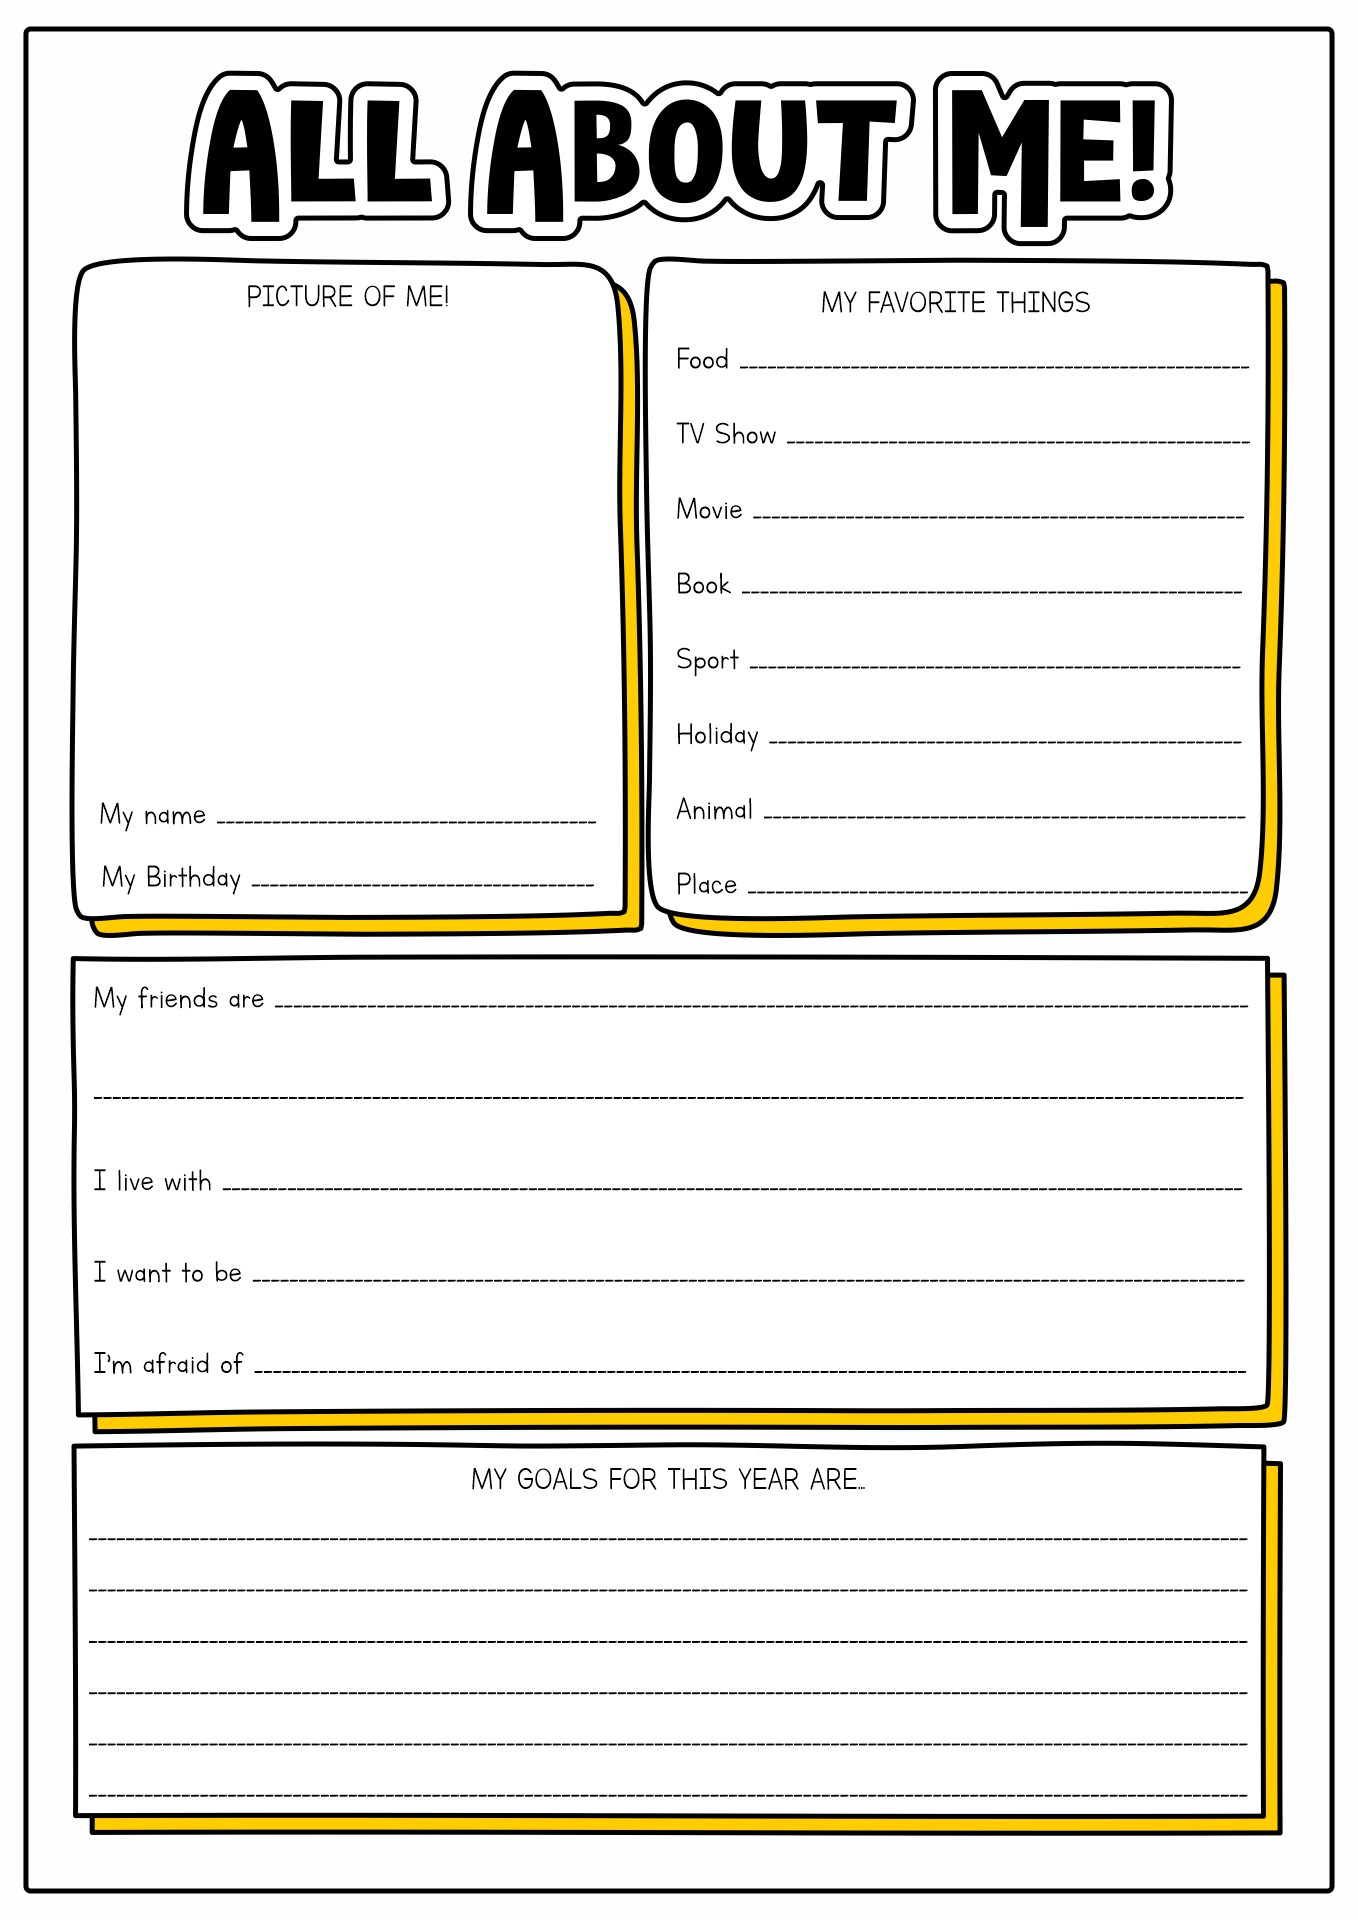 printable-all-about-me-template